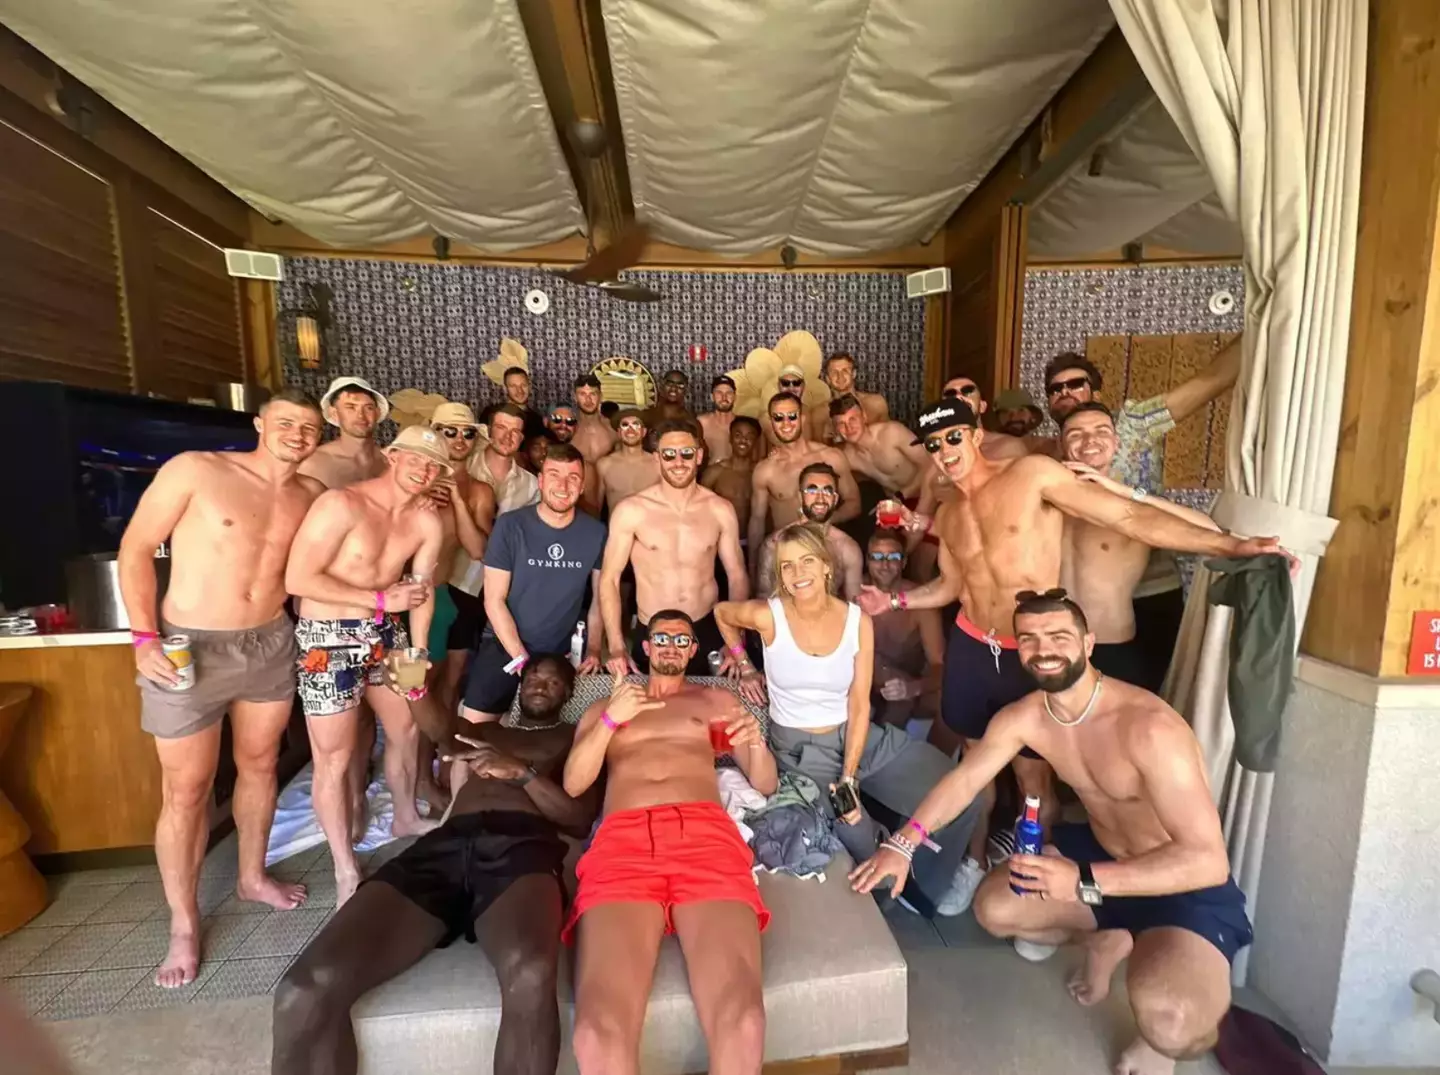 The squad evidently had a pretty wild time in Las Vegas.